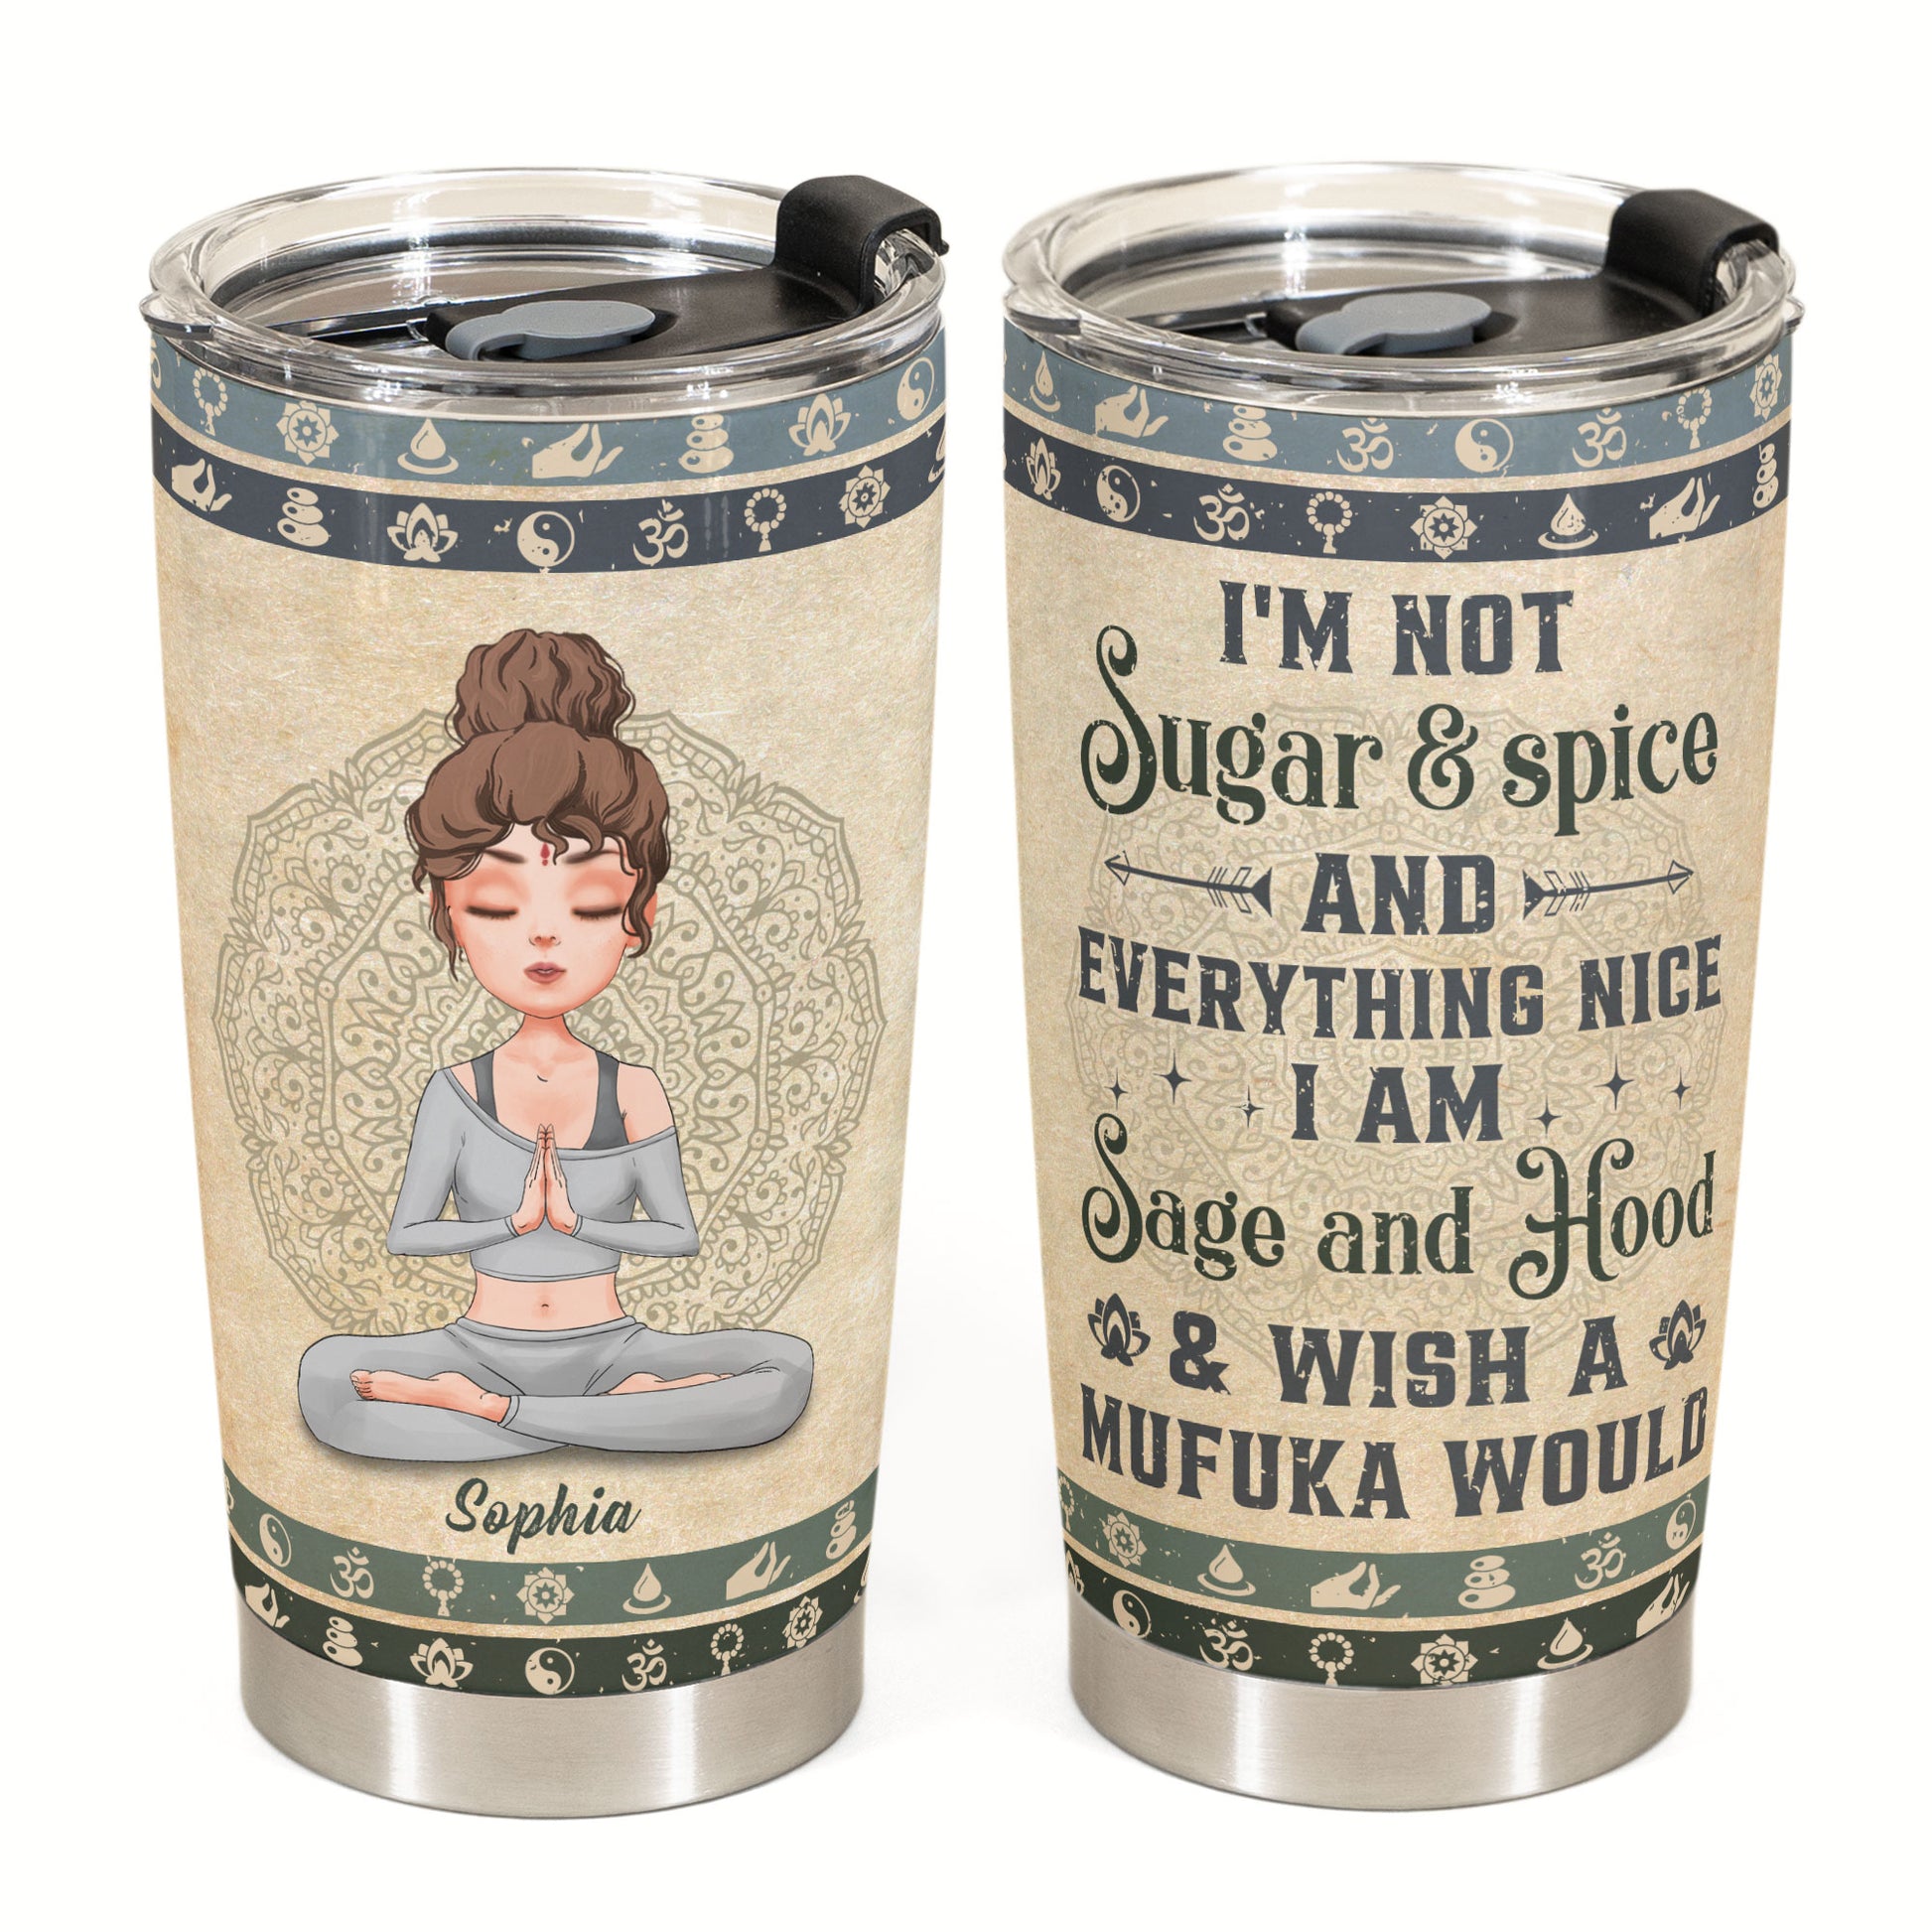 I'm Sage And Hood And Wish A Mufuka Would - Vintage Version  - Personalized Tumbler Cup - Birthday, Motivation Gift For Yoga Lover